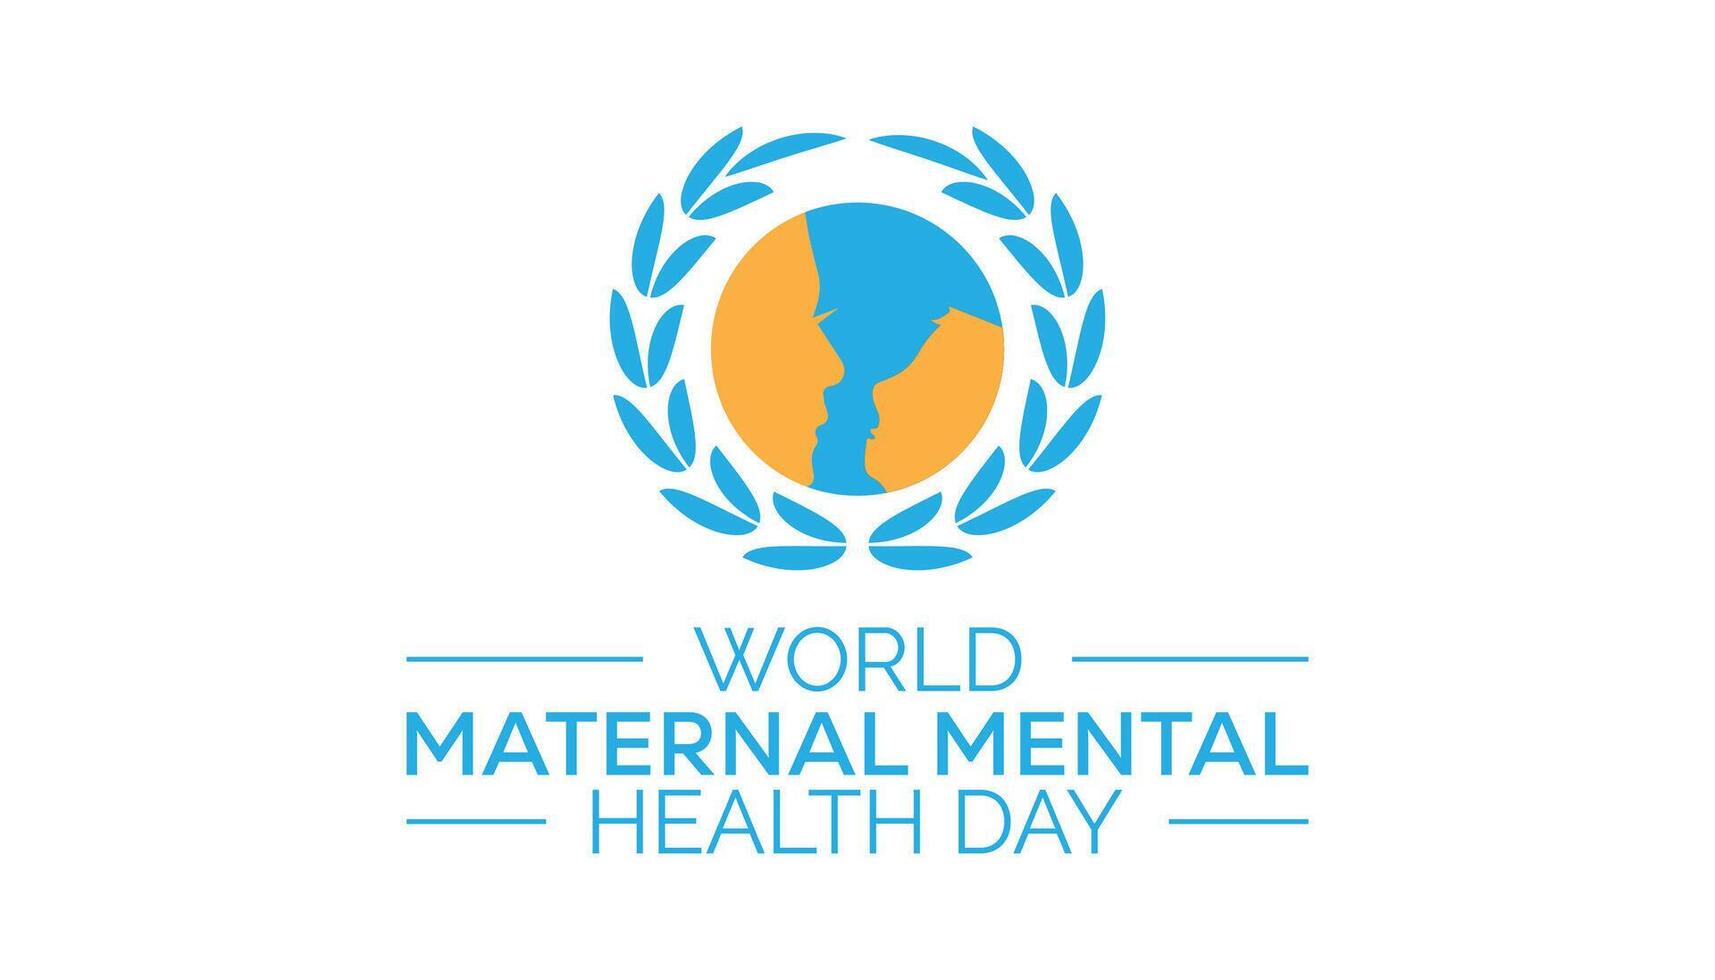 World Maternal Mental Health Day observed every year in May. Template for background, banner, card, poster with text inscription. vector